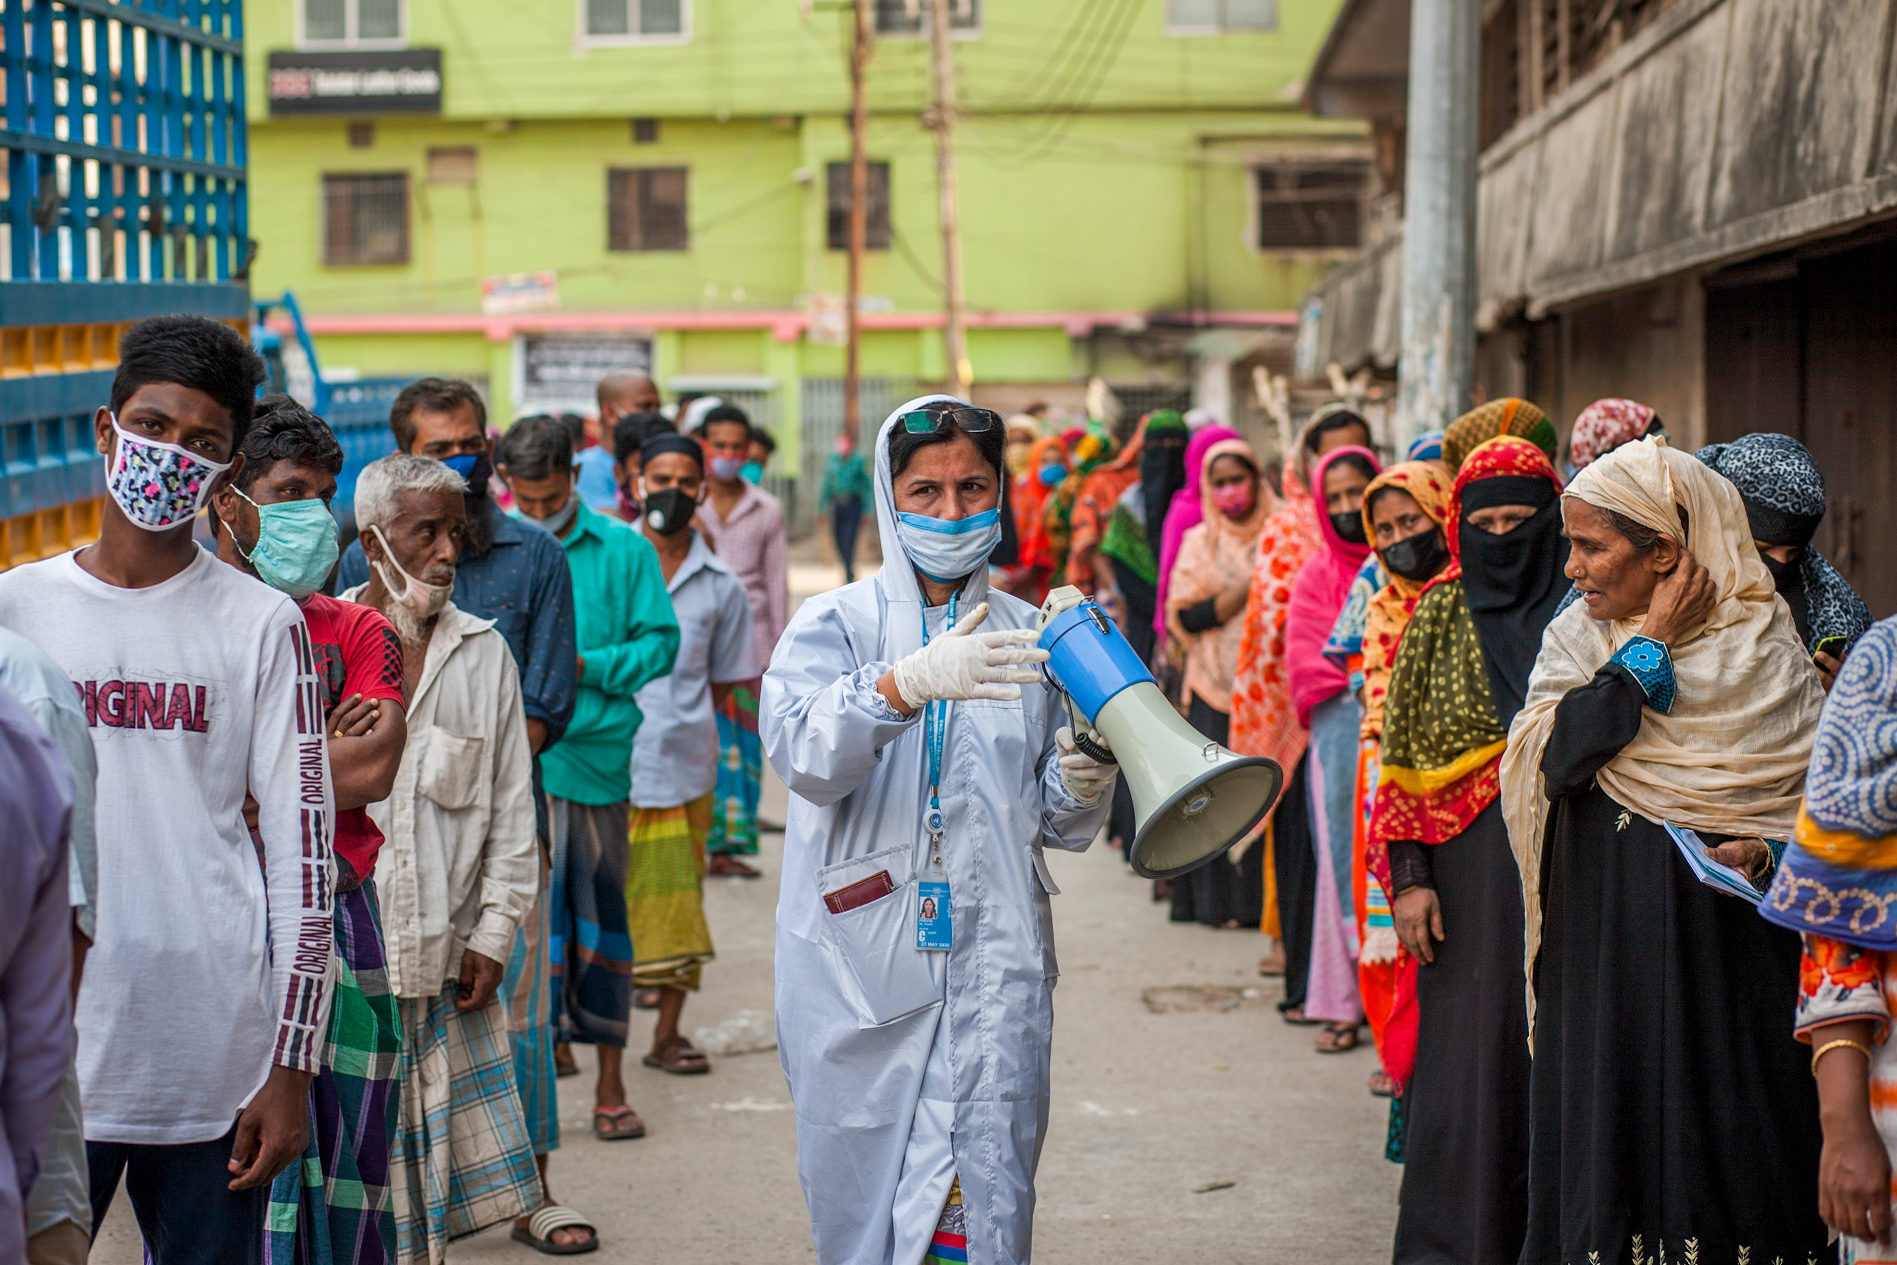 Photo of a woman wearing COVID-19 protective clothing, holding a loudspeaker walking along queuing people in Bangladesh.